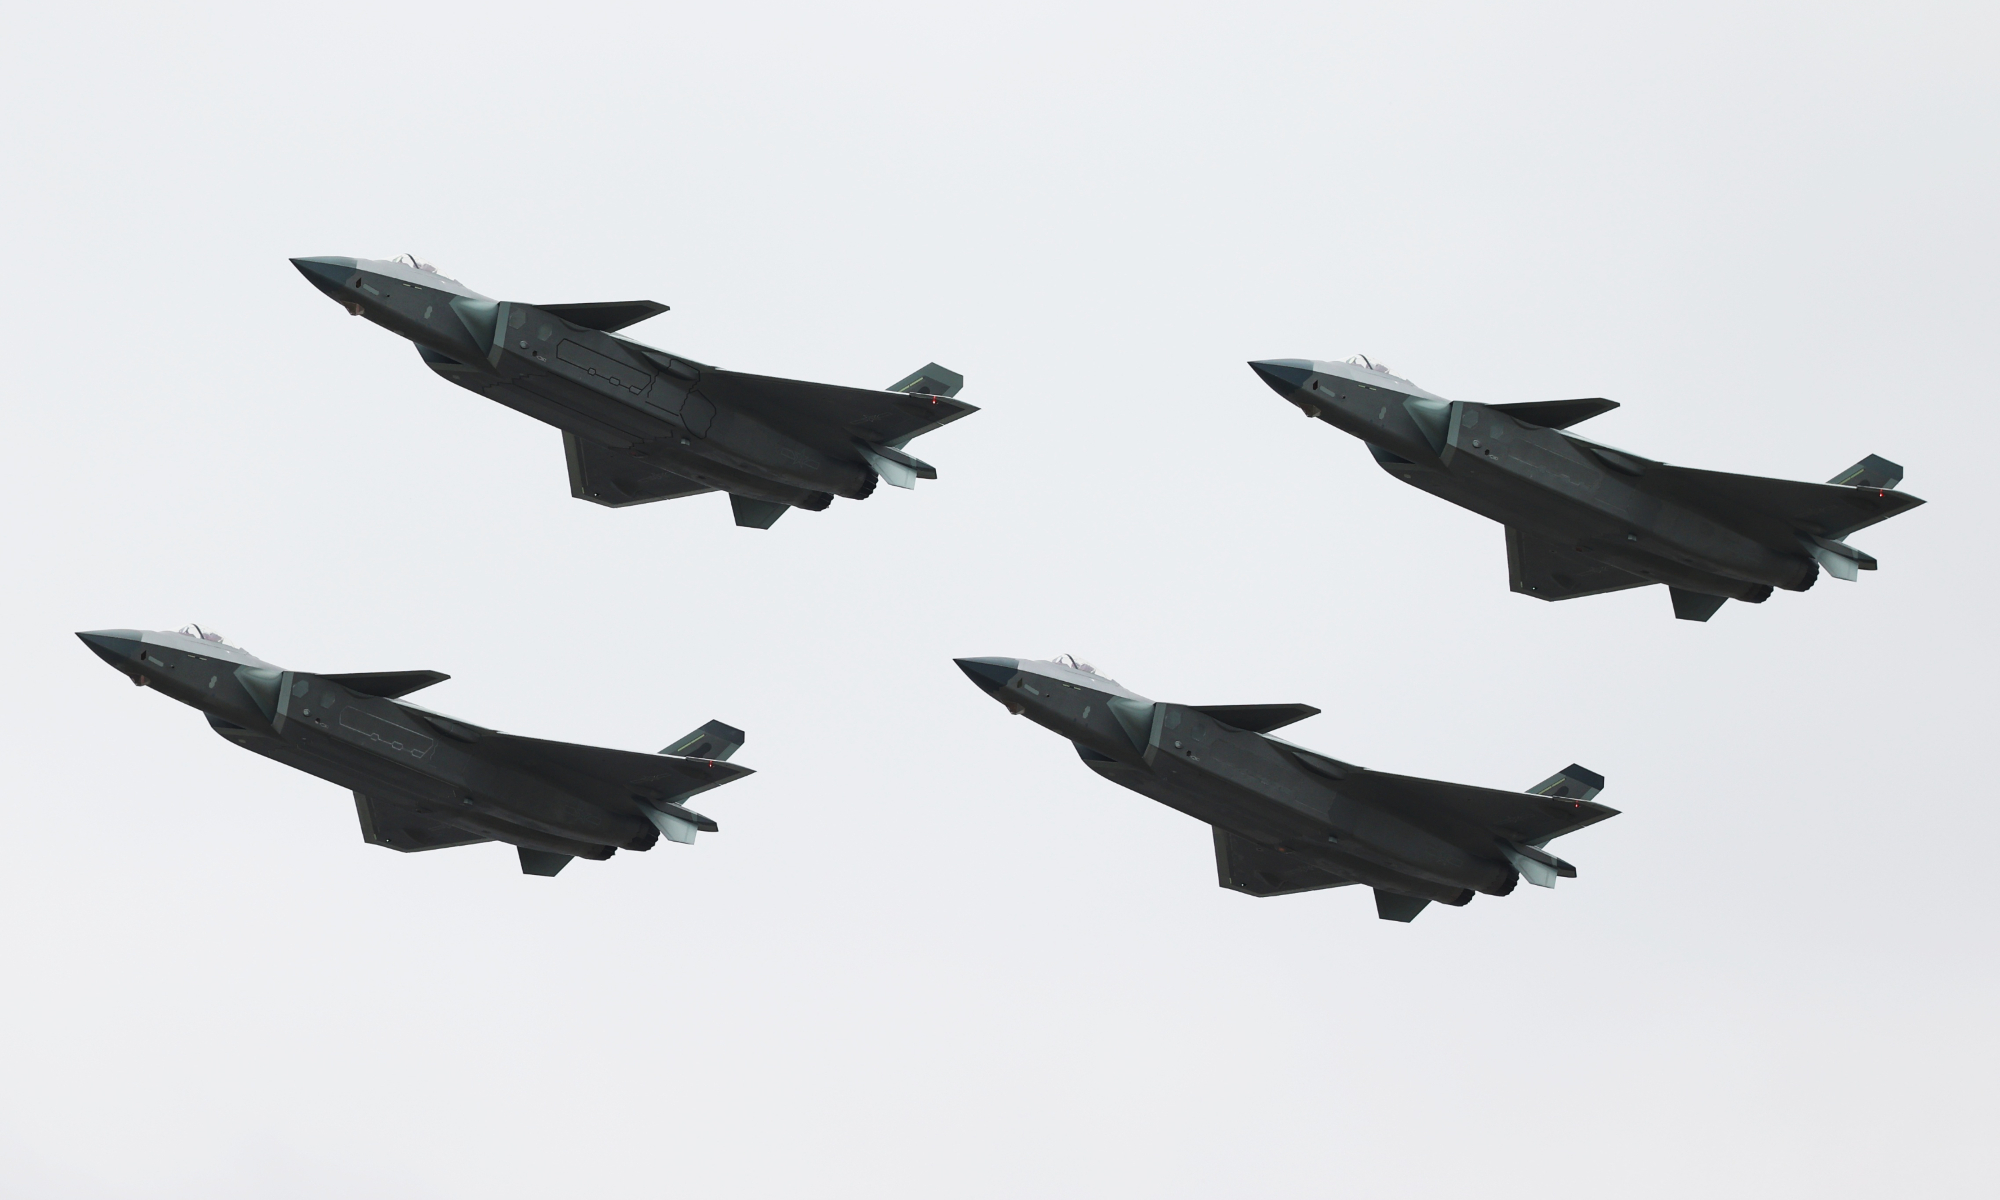 Four J-20 fighter jets fly in formation at Airshow China 2022 on Friday to celebrate the 73rd birthday of the PLA Air Force. Photo: Cui Meng/GT